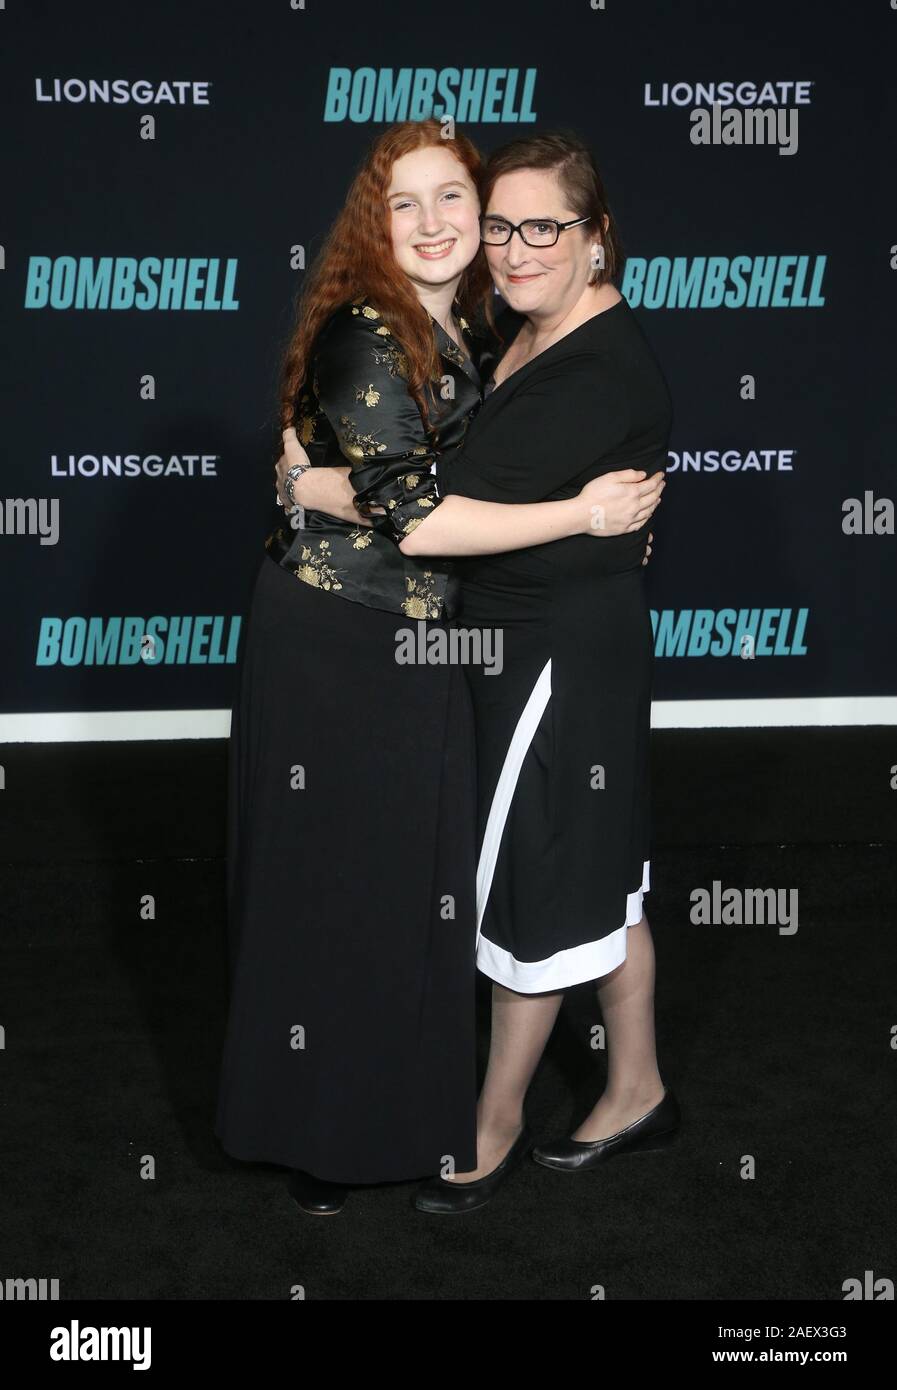 Los Angeles, Ca. 10th Dec, 2019. Hazel Armenante, Jillian Armenante, at the Special Screening of Bombshell at the Regency Village in Los Angeles, California on December 10, 2019. Credit: Faye Sadou/Media Punch/Alamy Live News Stock Photo